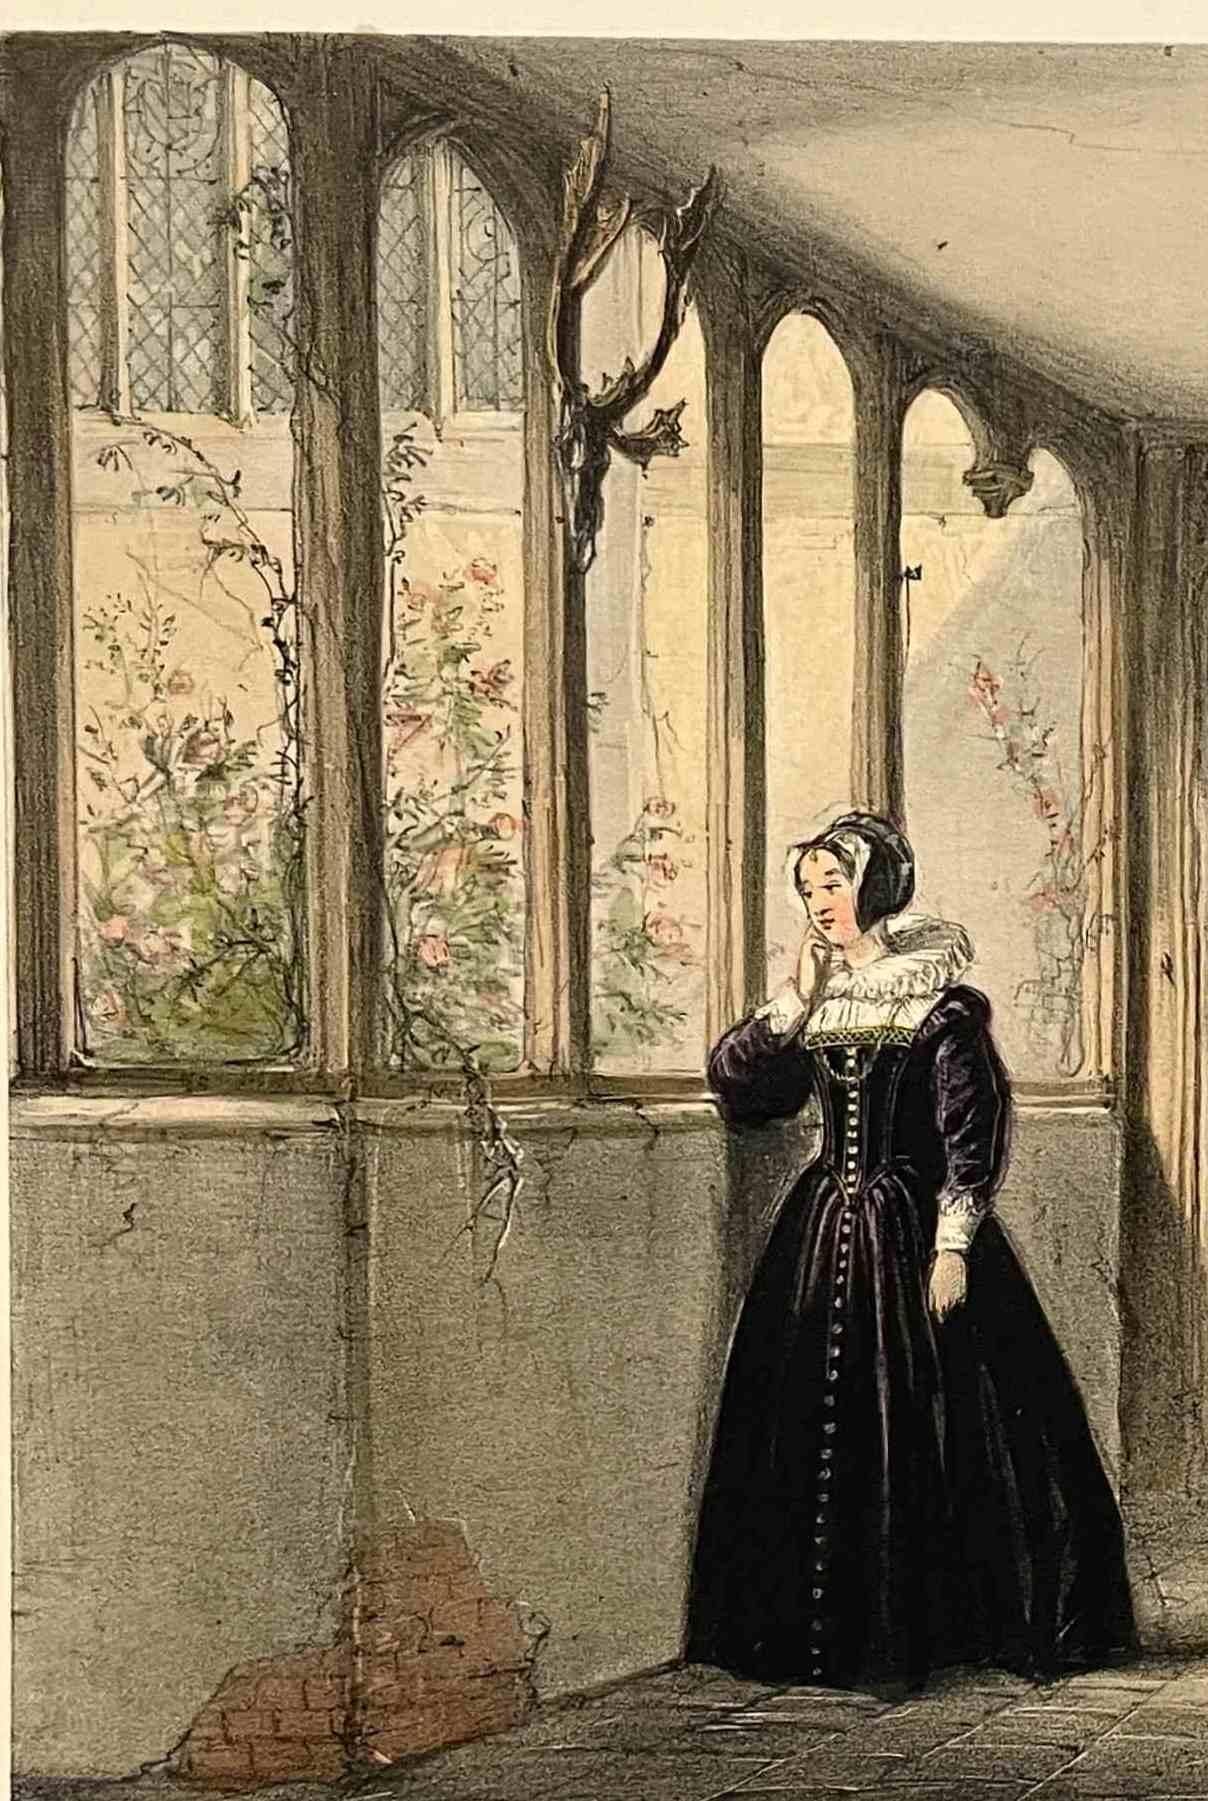 A Hand colored lithograph on paper of Porch and Corridor, Ockwells, Berks., plate from the disbound book “The Mansions of England in the Olden Time”, first series, printed by Charles Joseph Hullmandel (Pub. London: T. M'Lean, 1839).  Archivally